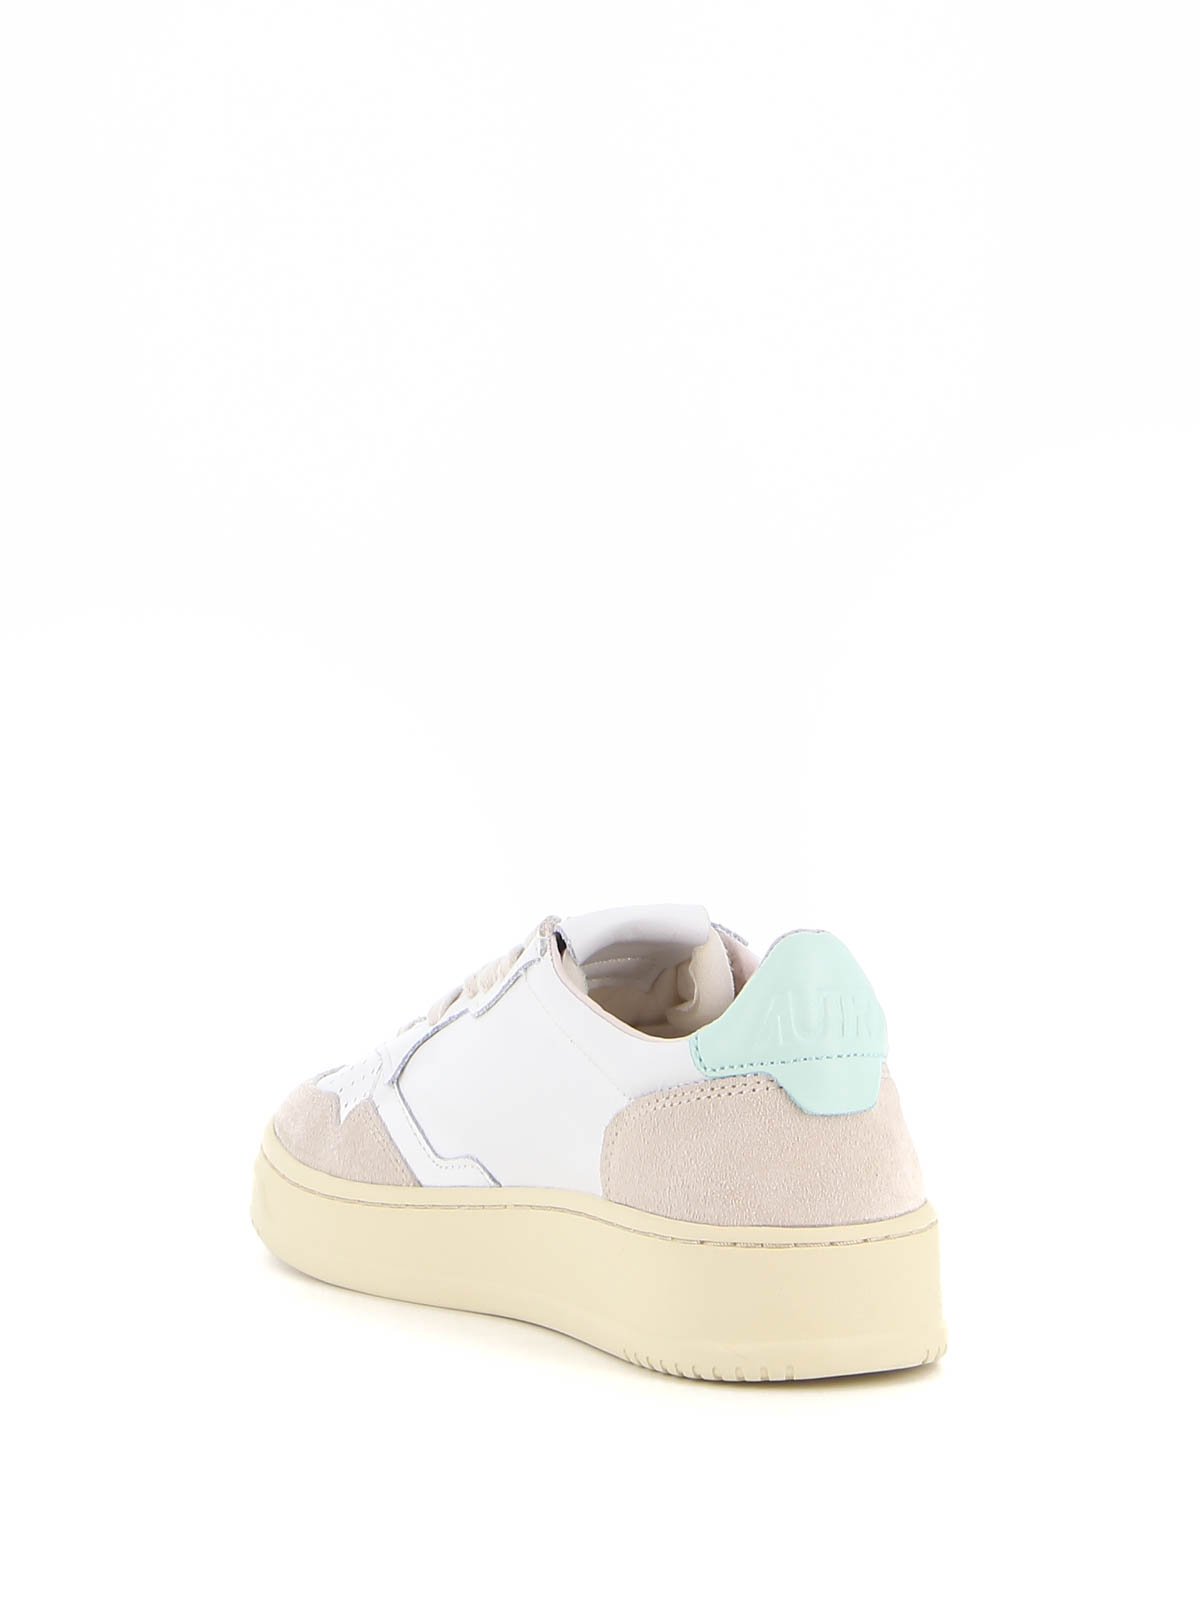 Immagine di Autry | Autry 01 Low Leather Suede